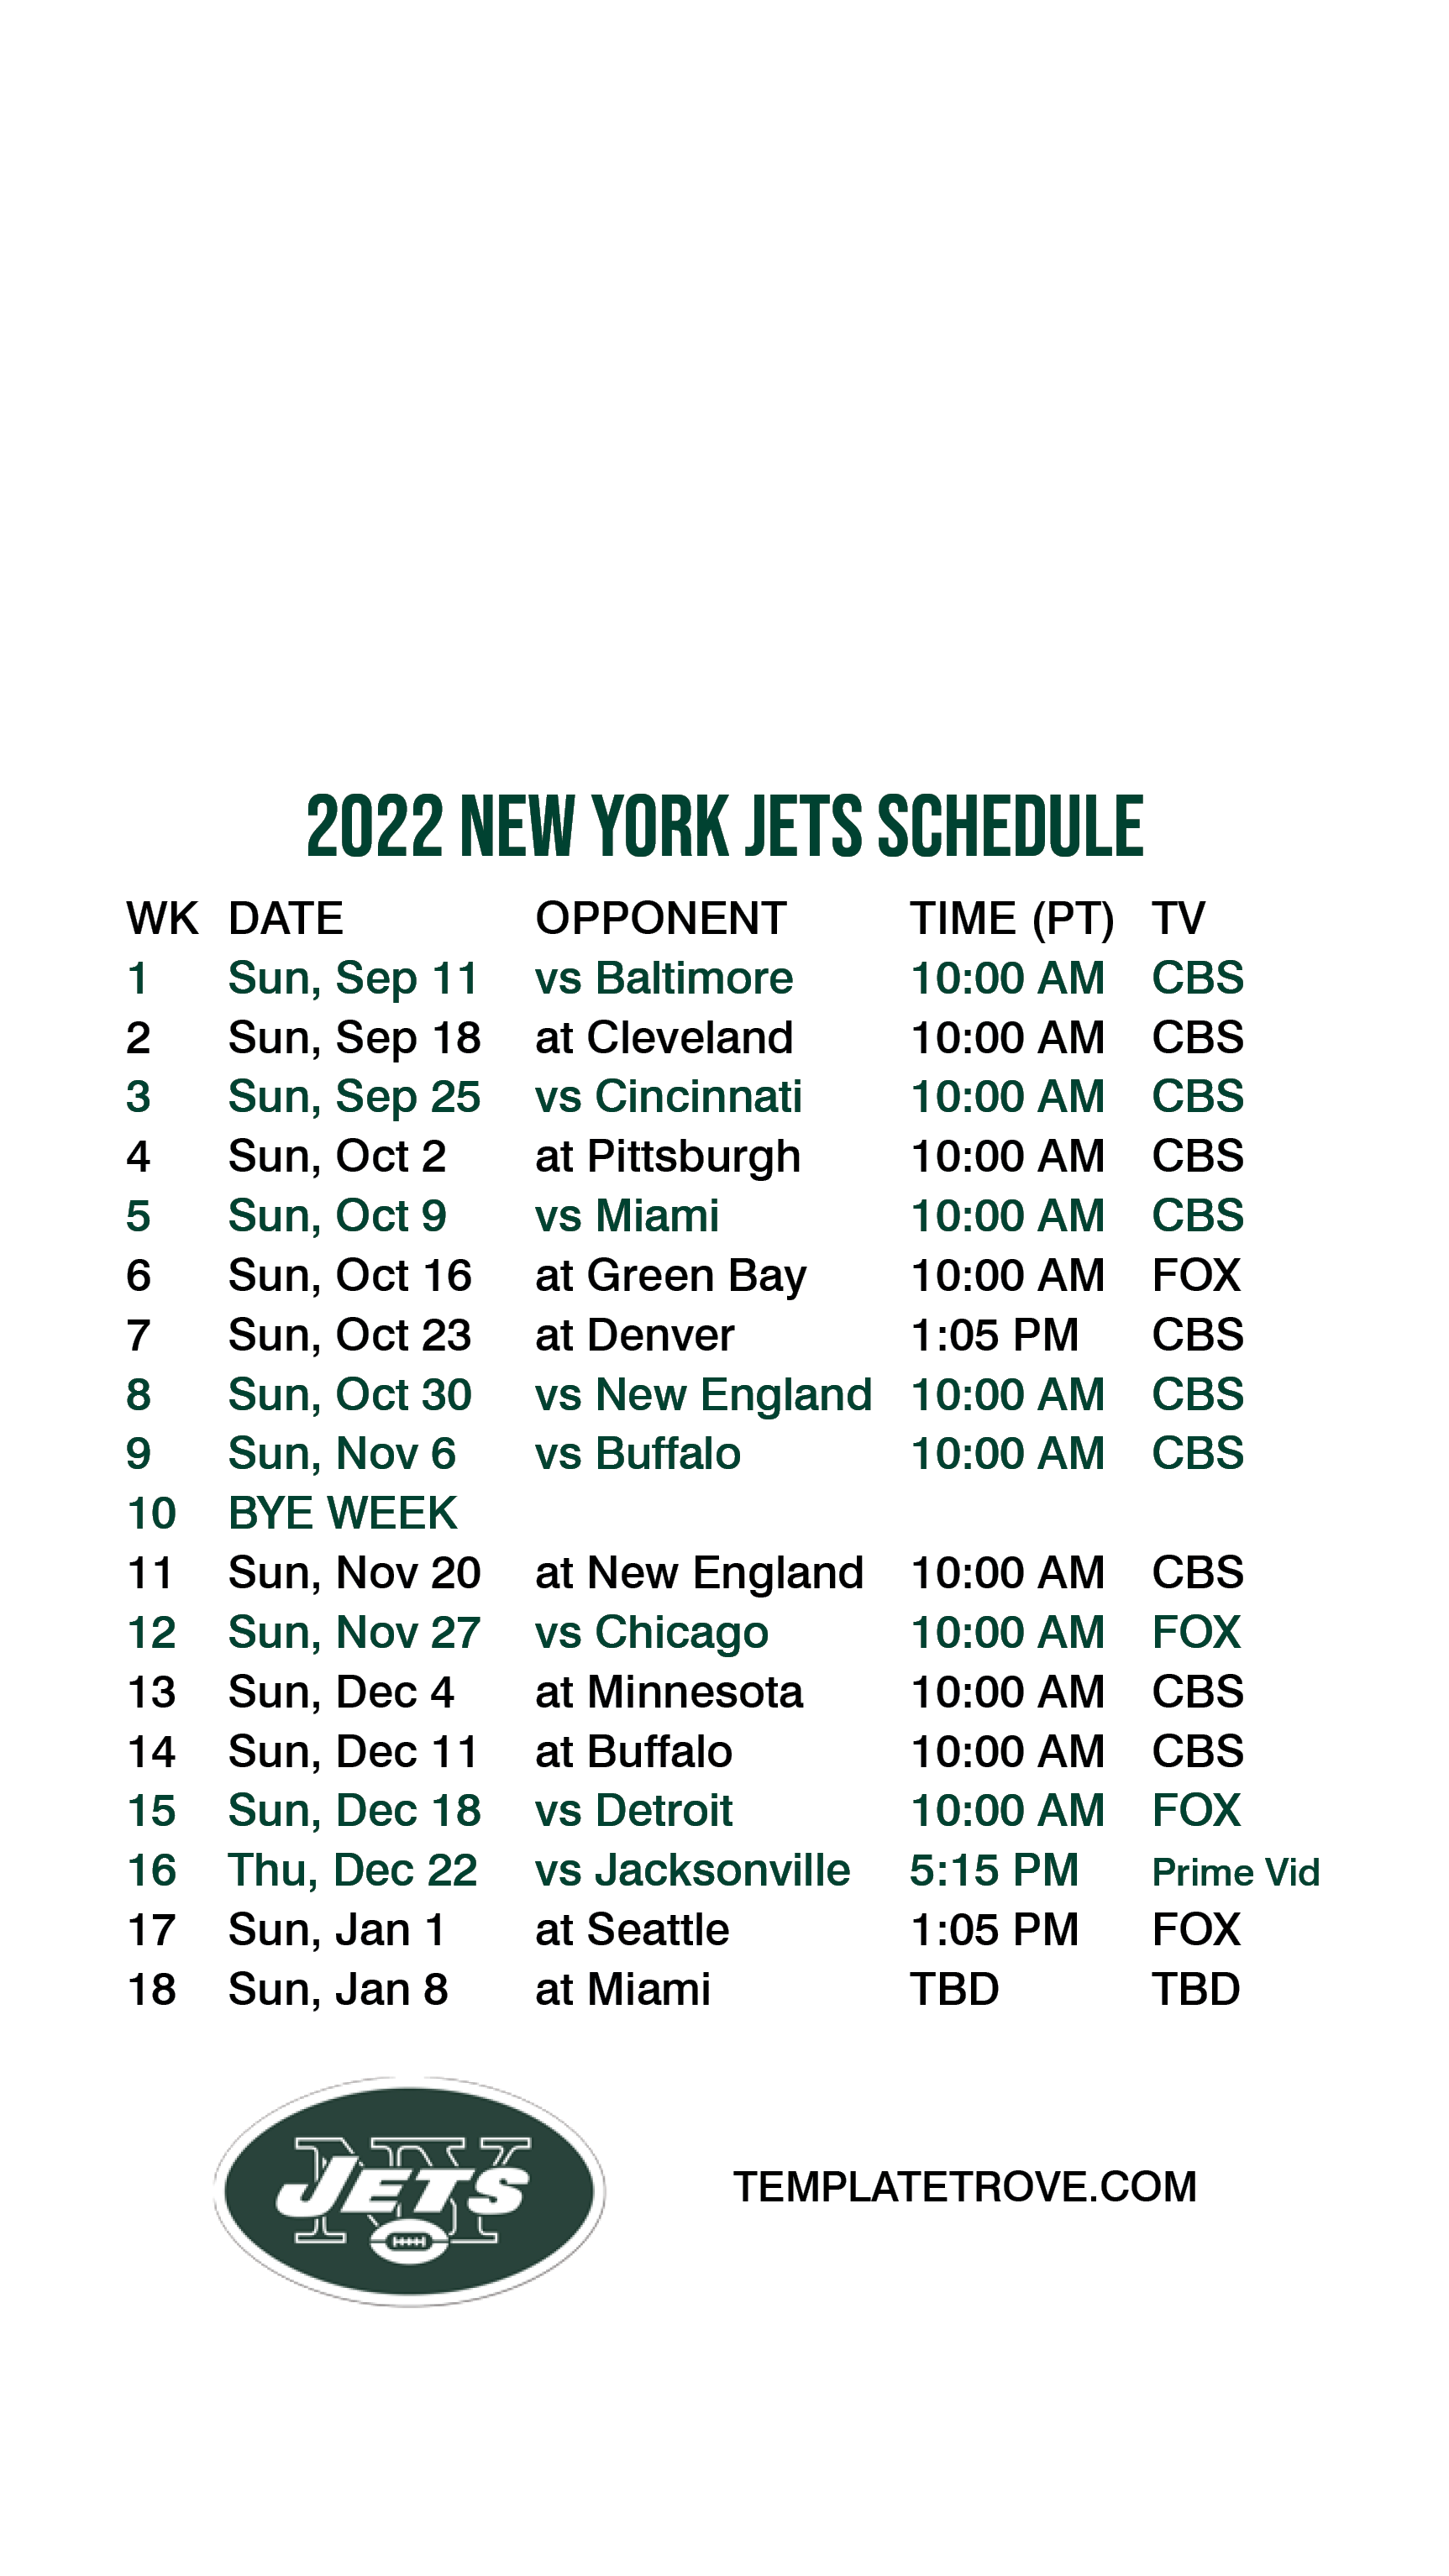 2022-2023 New York Jets Lock Screen Schedule for iPhone 6-7-8 Plus